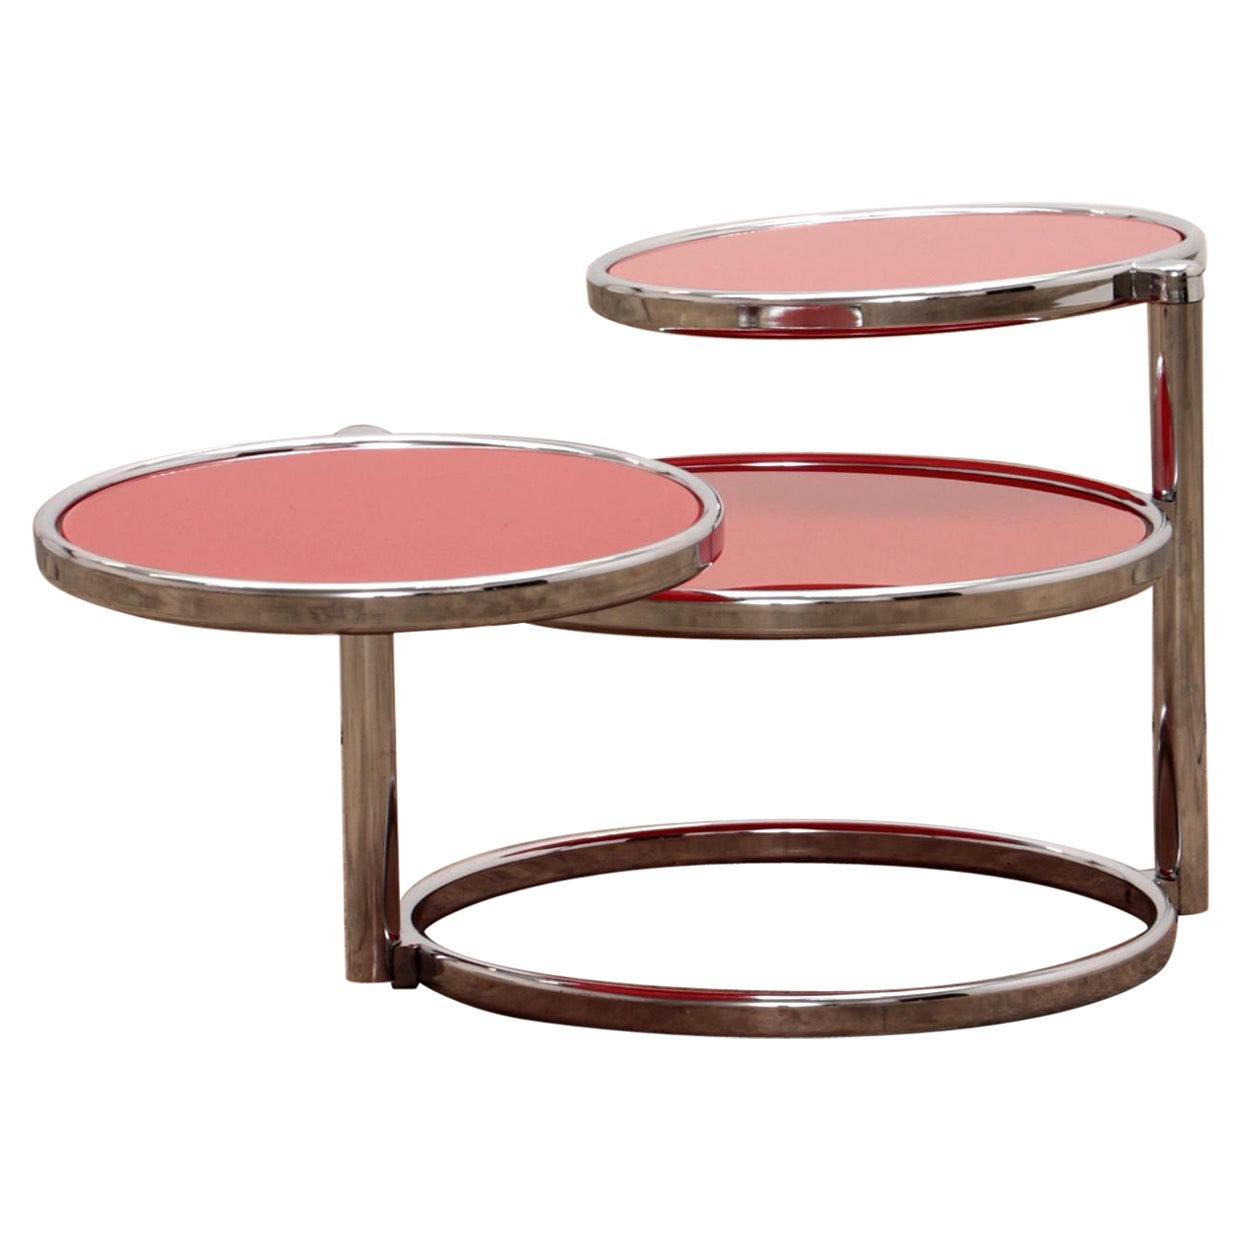 Vintage Coffee Table with Round Red Glass Plates, 1960, France